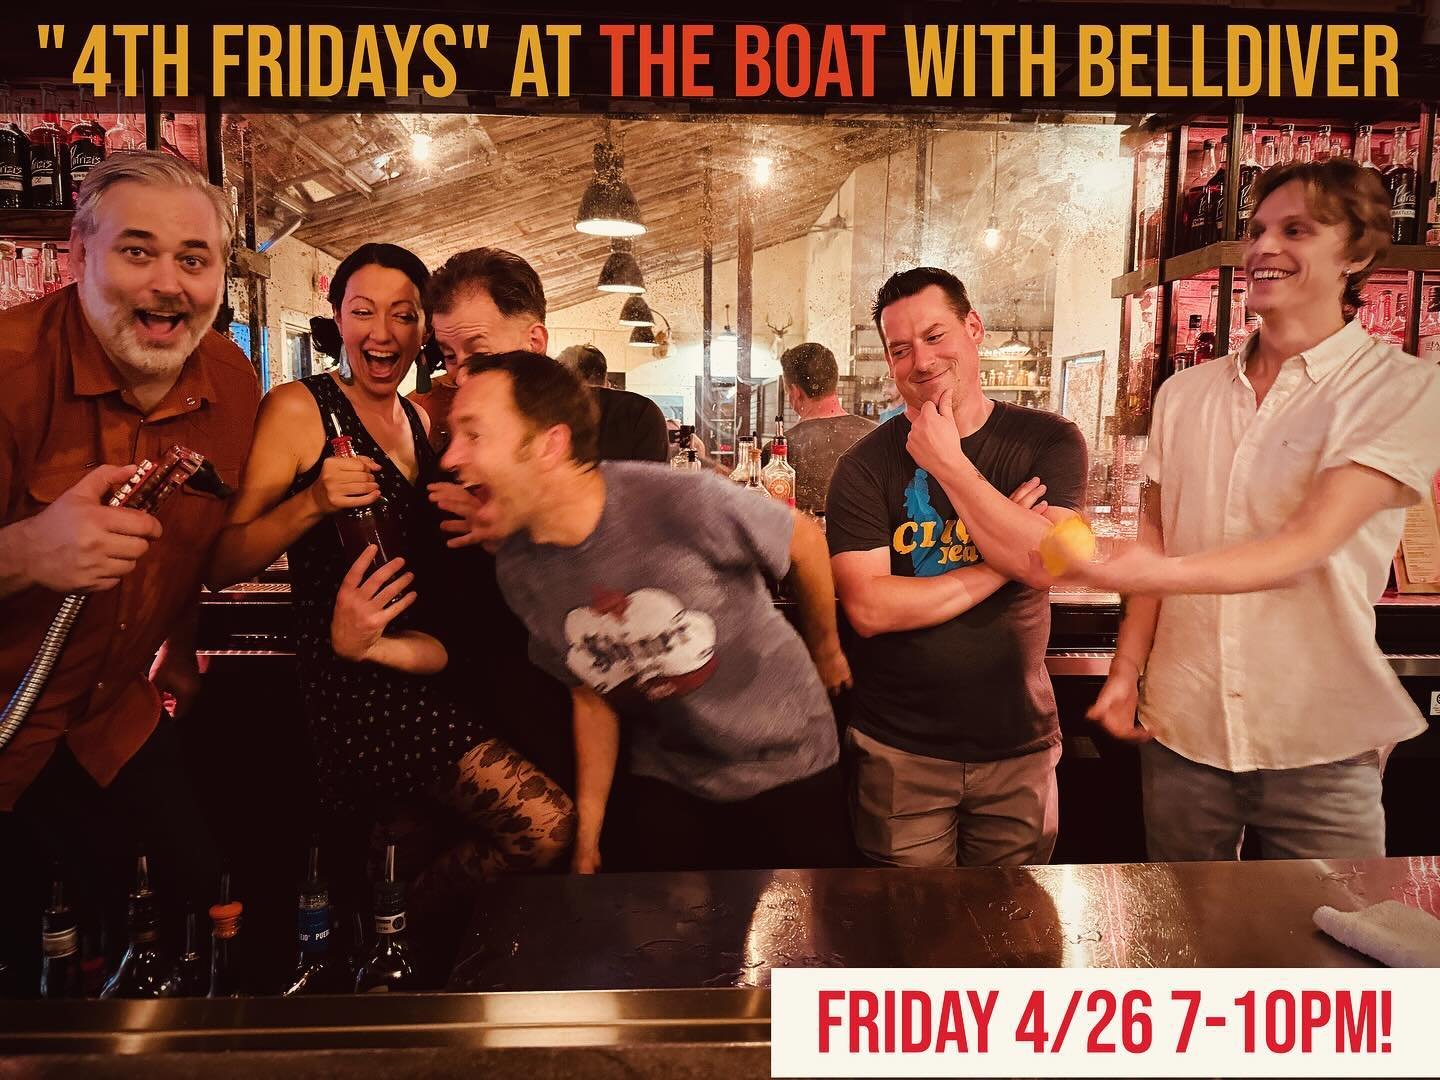 Join these weirdos 👆🏻at @theboatatx on Friday as we continue our &ldquo;4th Fridays&rdquo; series every month through June. You guessed it, we play the 4th Friday of every month. 

We&rsquo;ll be on from 7-10 so head on out for drinks, great food, 